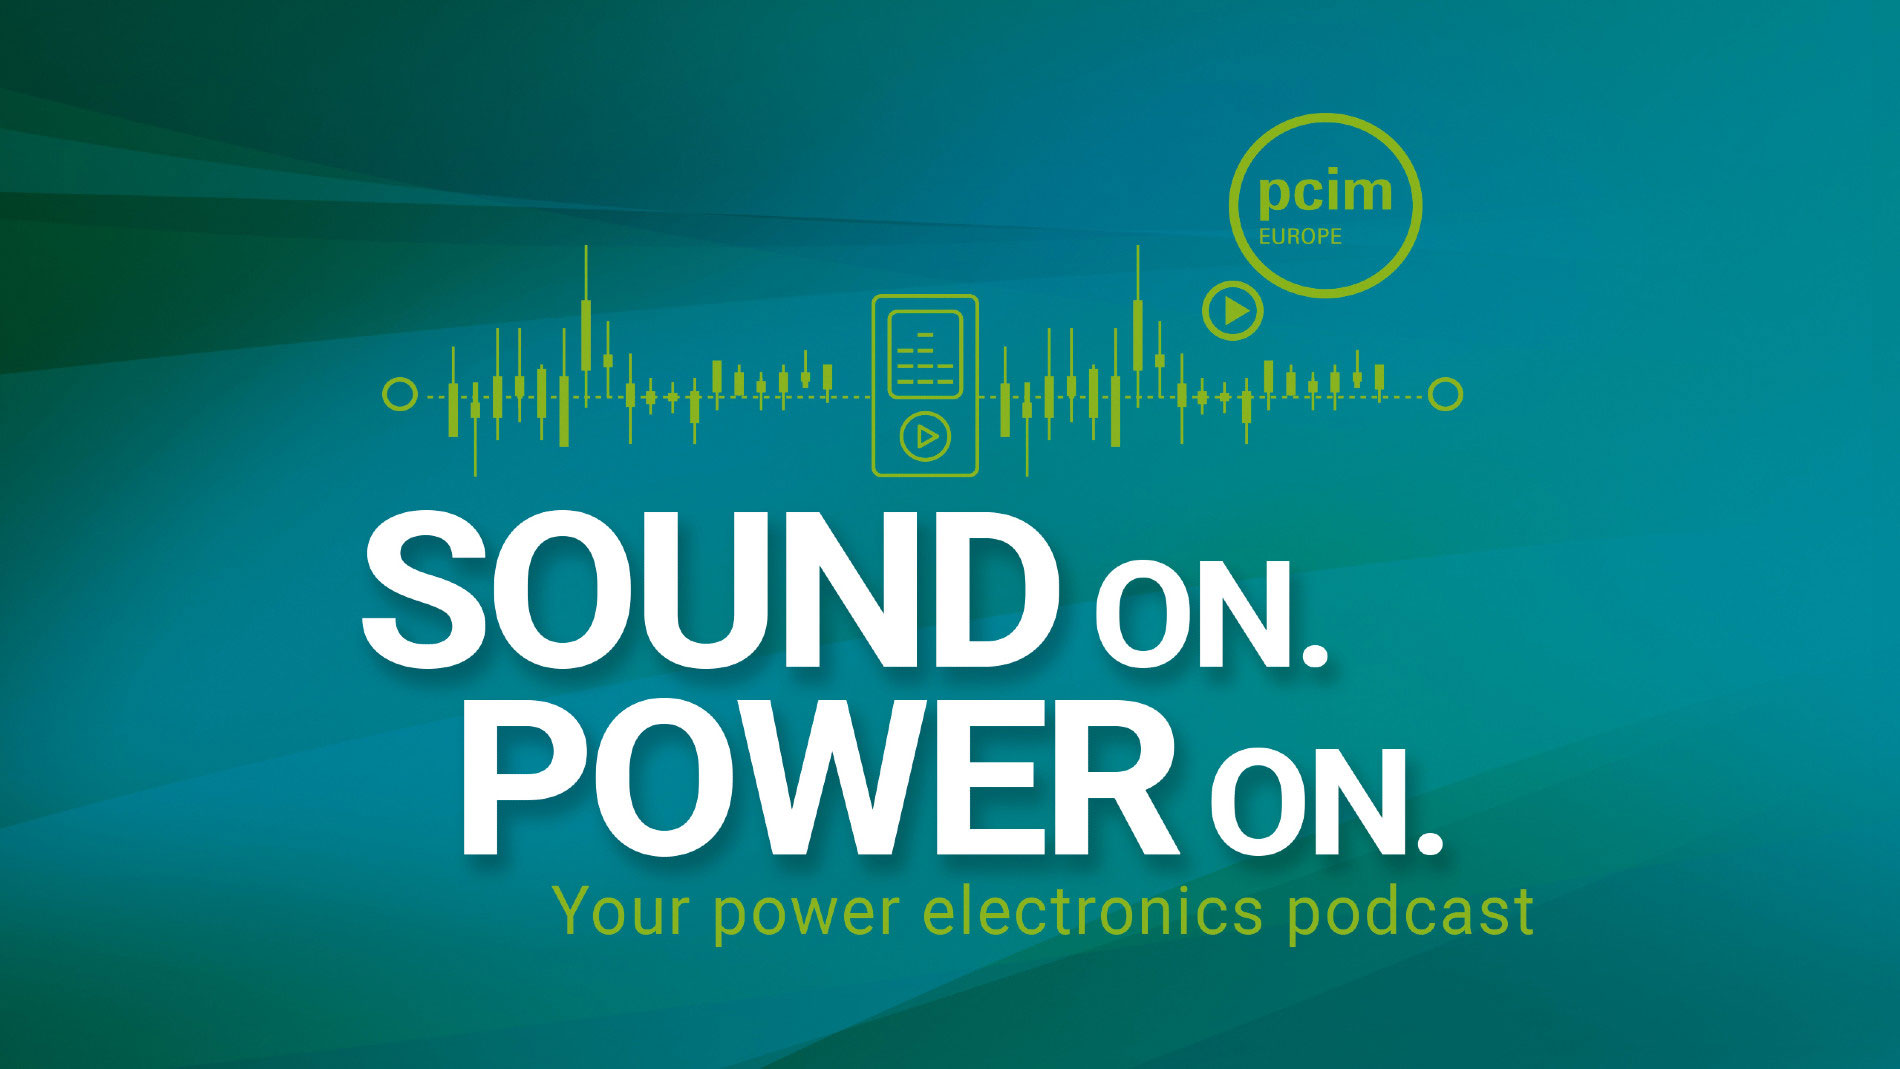 “Sound on. Power on.” – your power electronics podcast